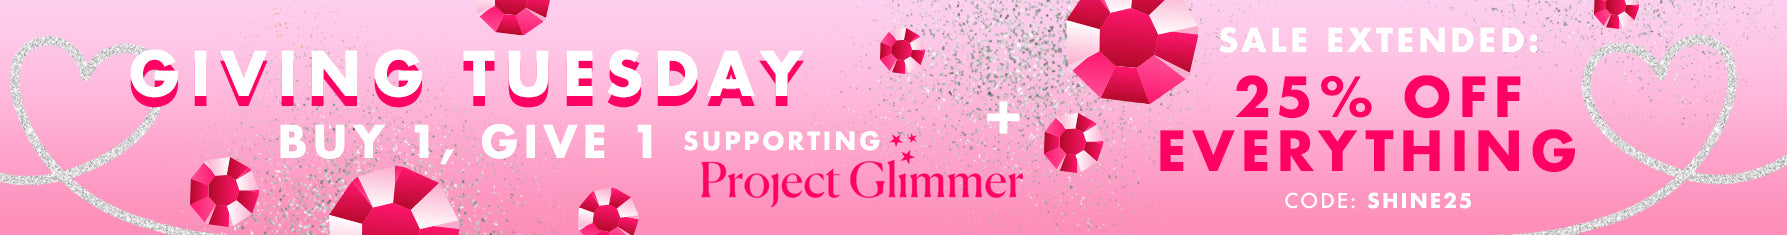 Giving Tuesday, buy 1 give 1, supporting project glimmer